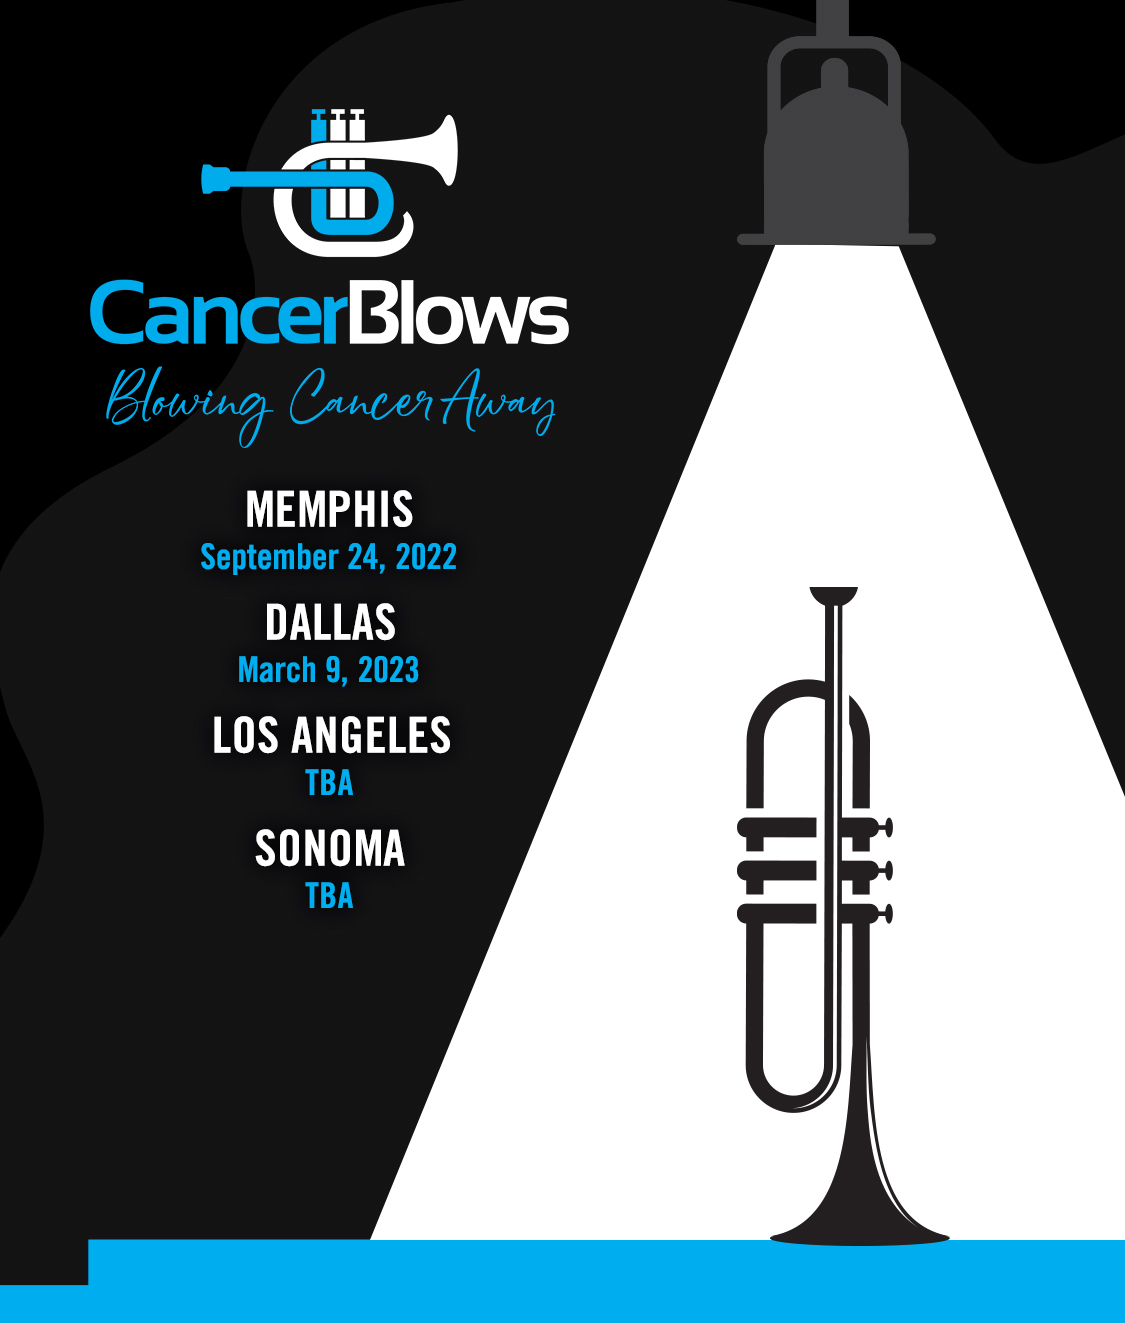 CancerBlows-Trumpet-on-Stage-teaser-dates-mobile